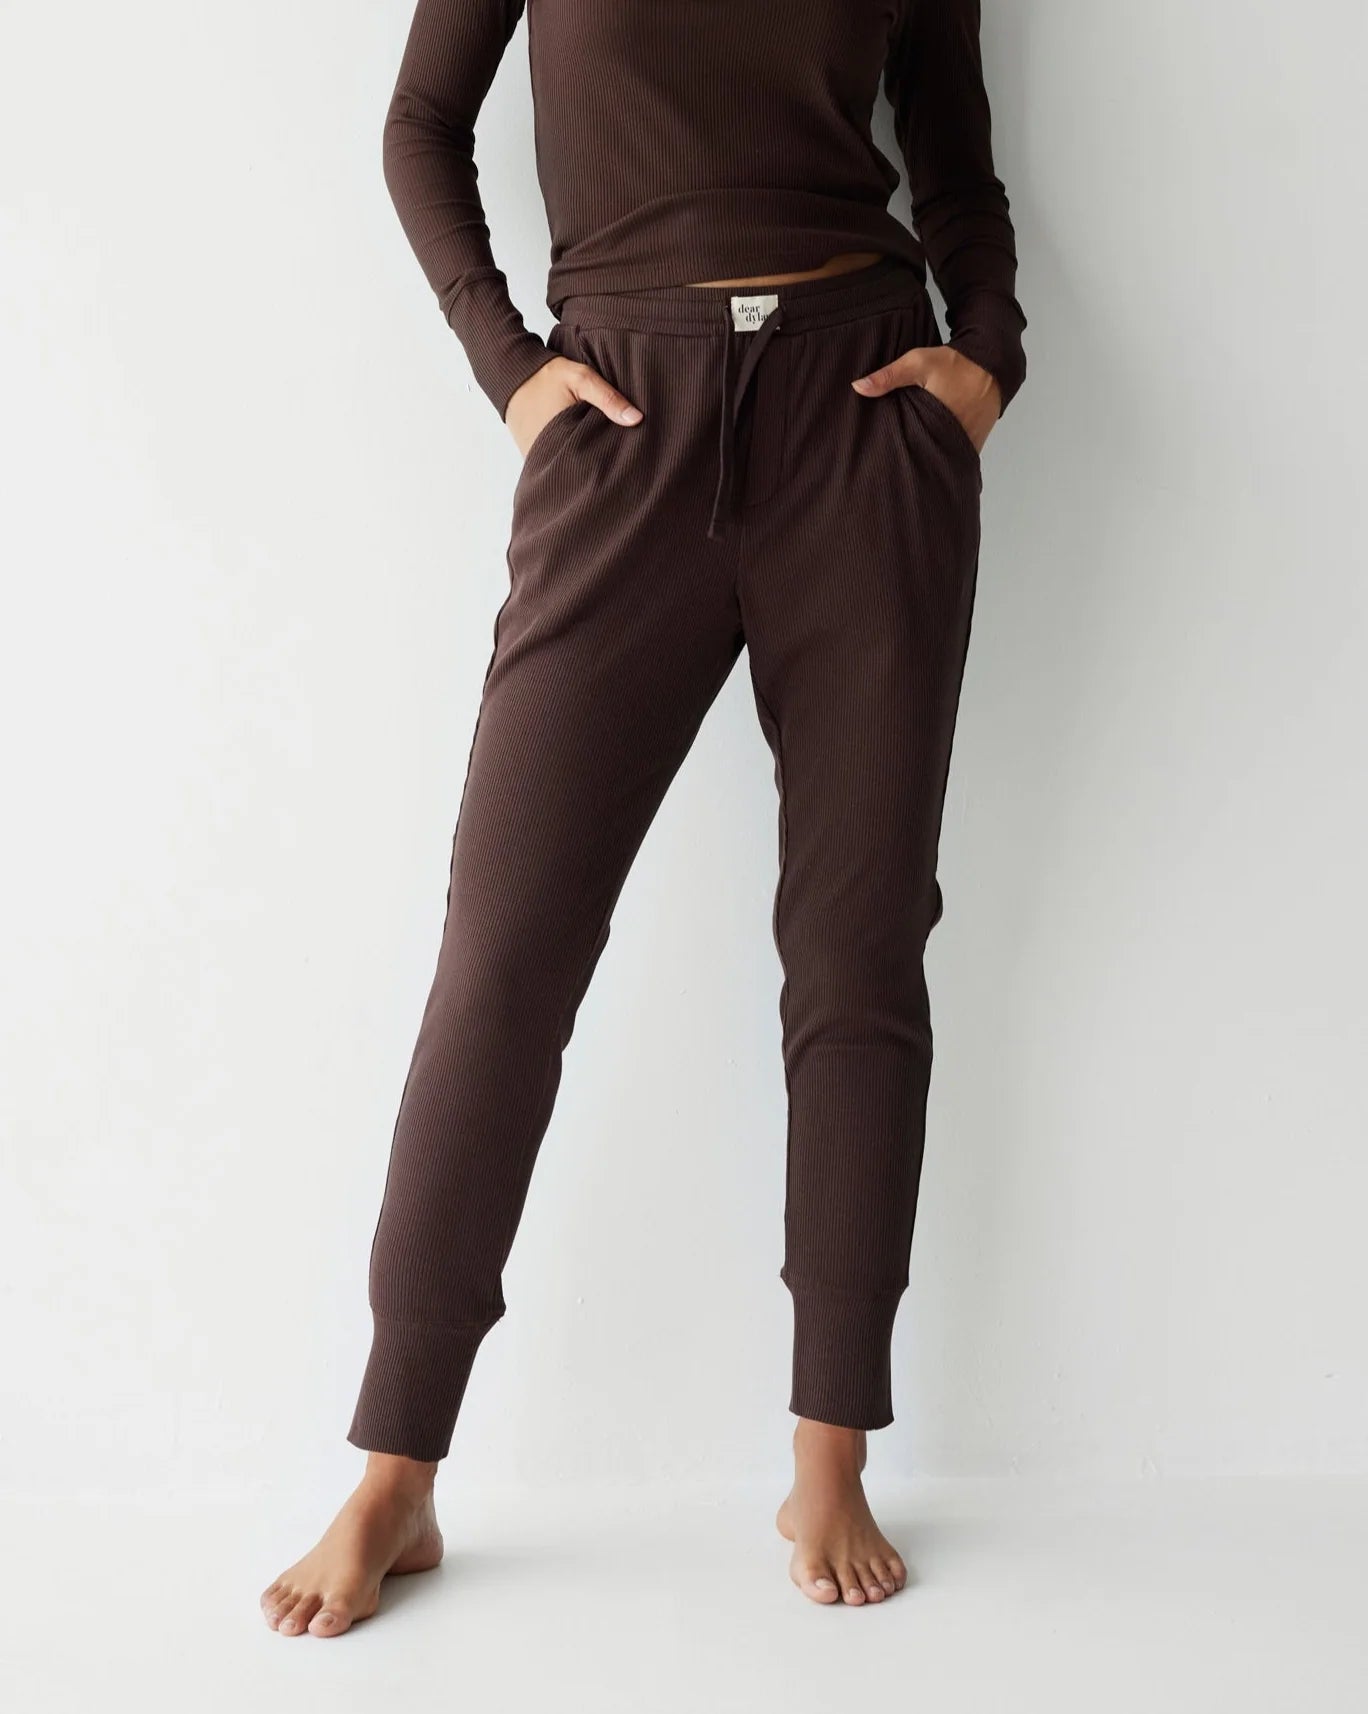 DEAR DYLAN // Slim Lounge Pant COCOA